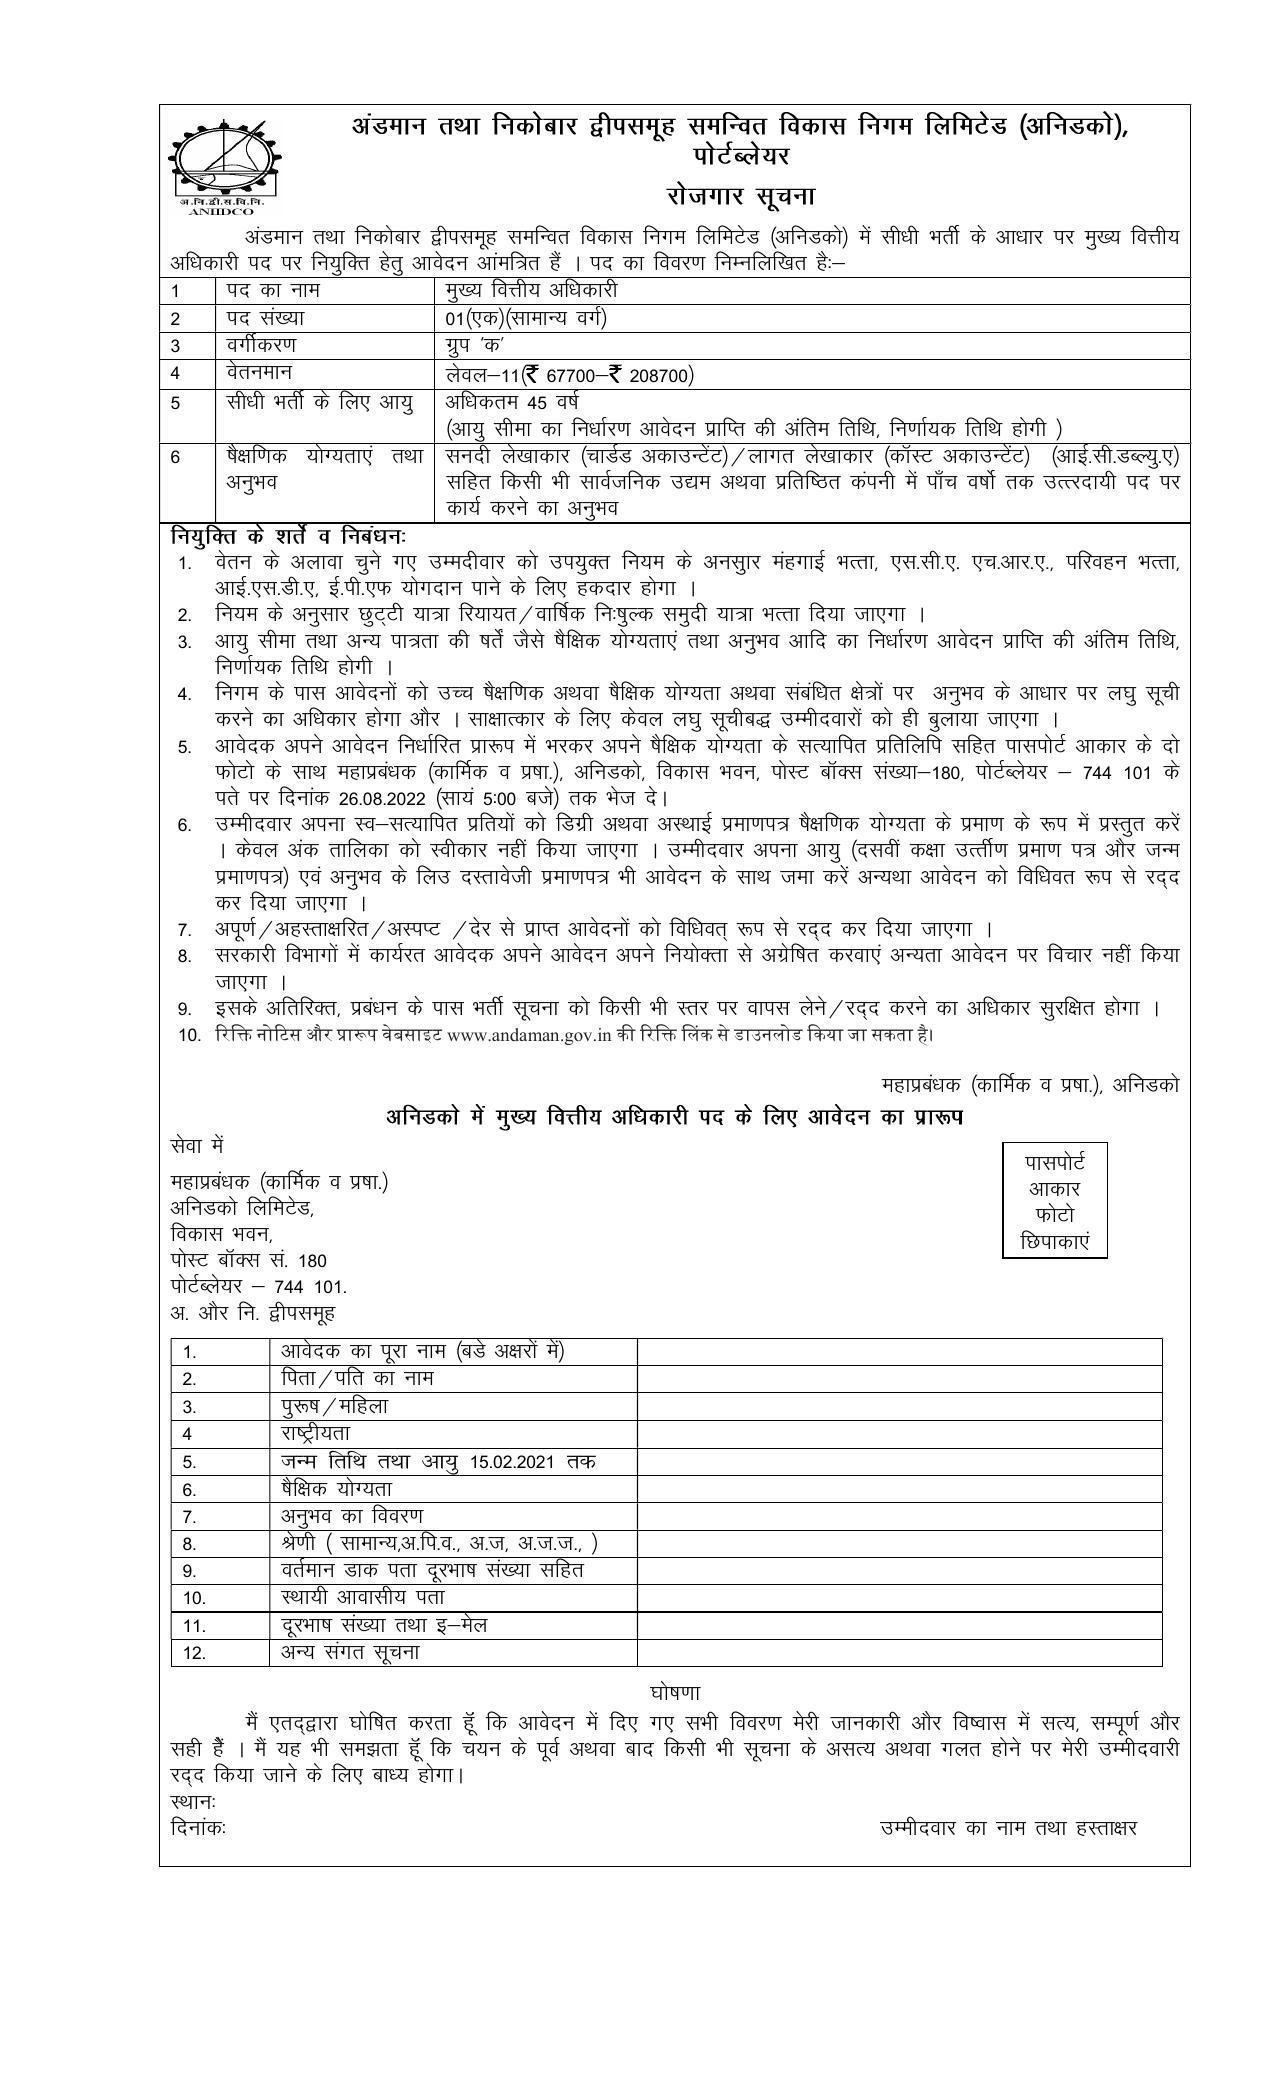 Andaman & Nicobar Administration Invites Application for Chief Financial Officer Recruitment 2022 - Page 2